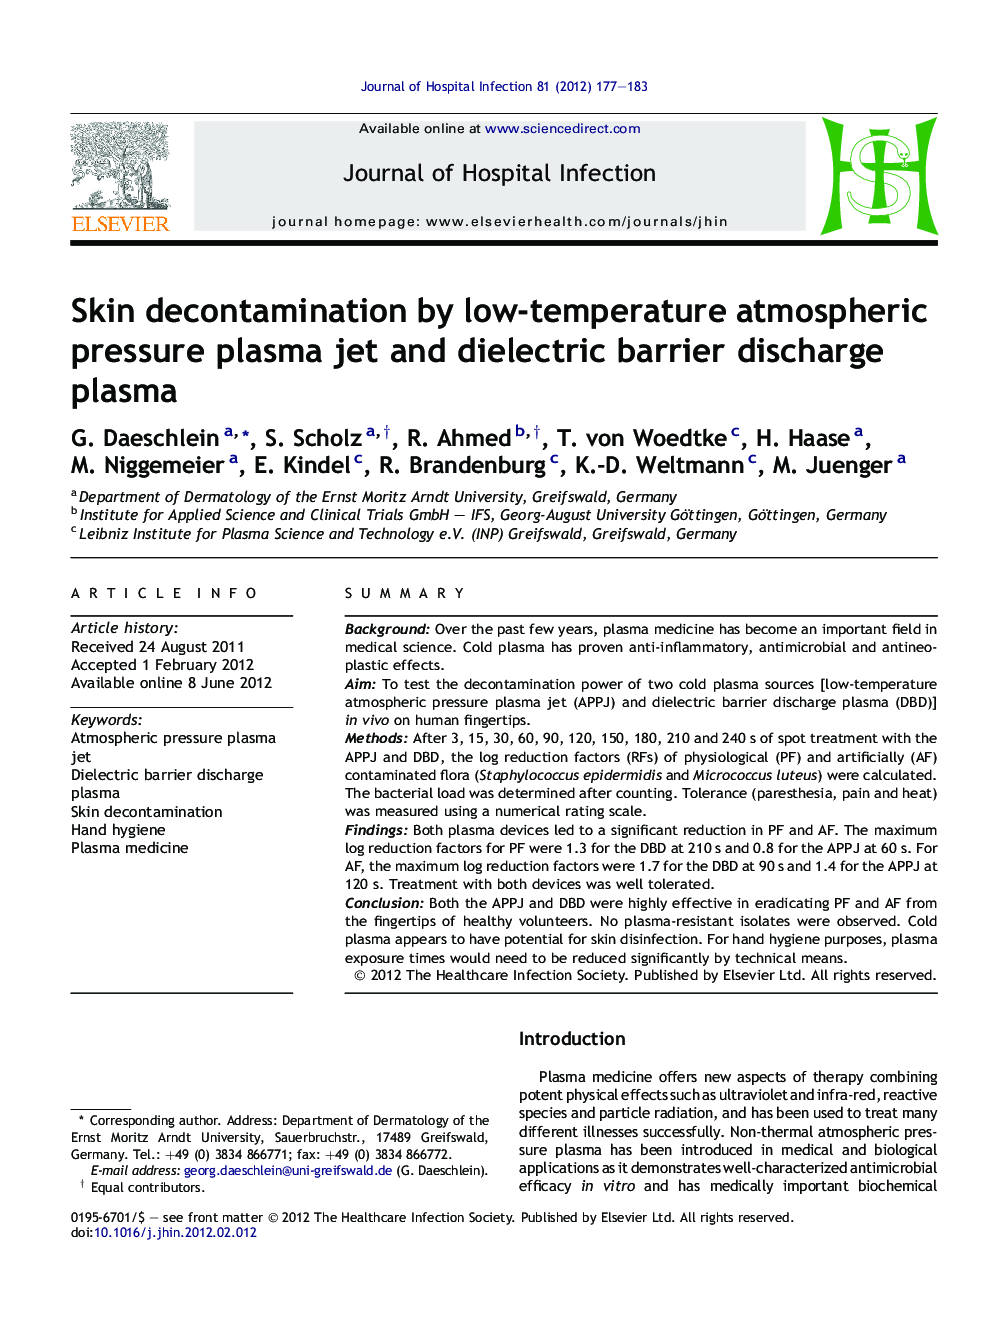 Skin decontamination by low-temperature atmospheric pressure plasma jet and dielectric barrier discharge plasma